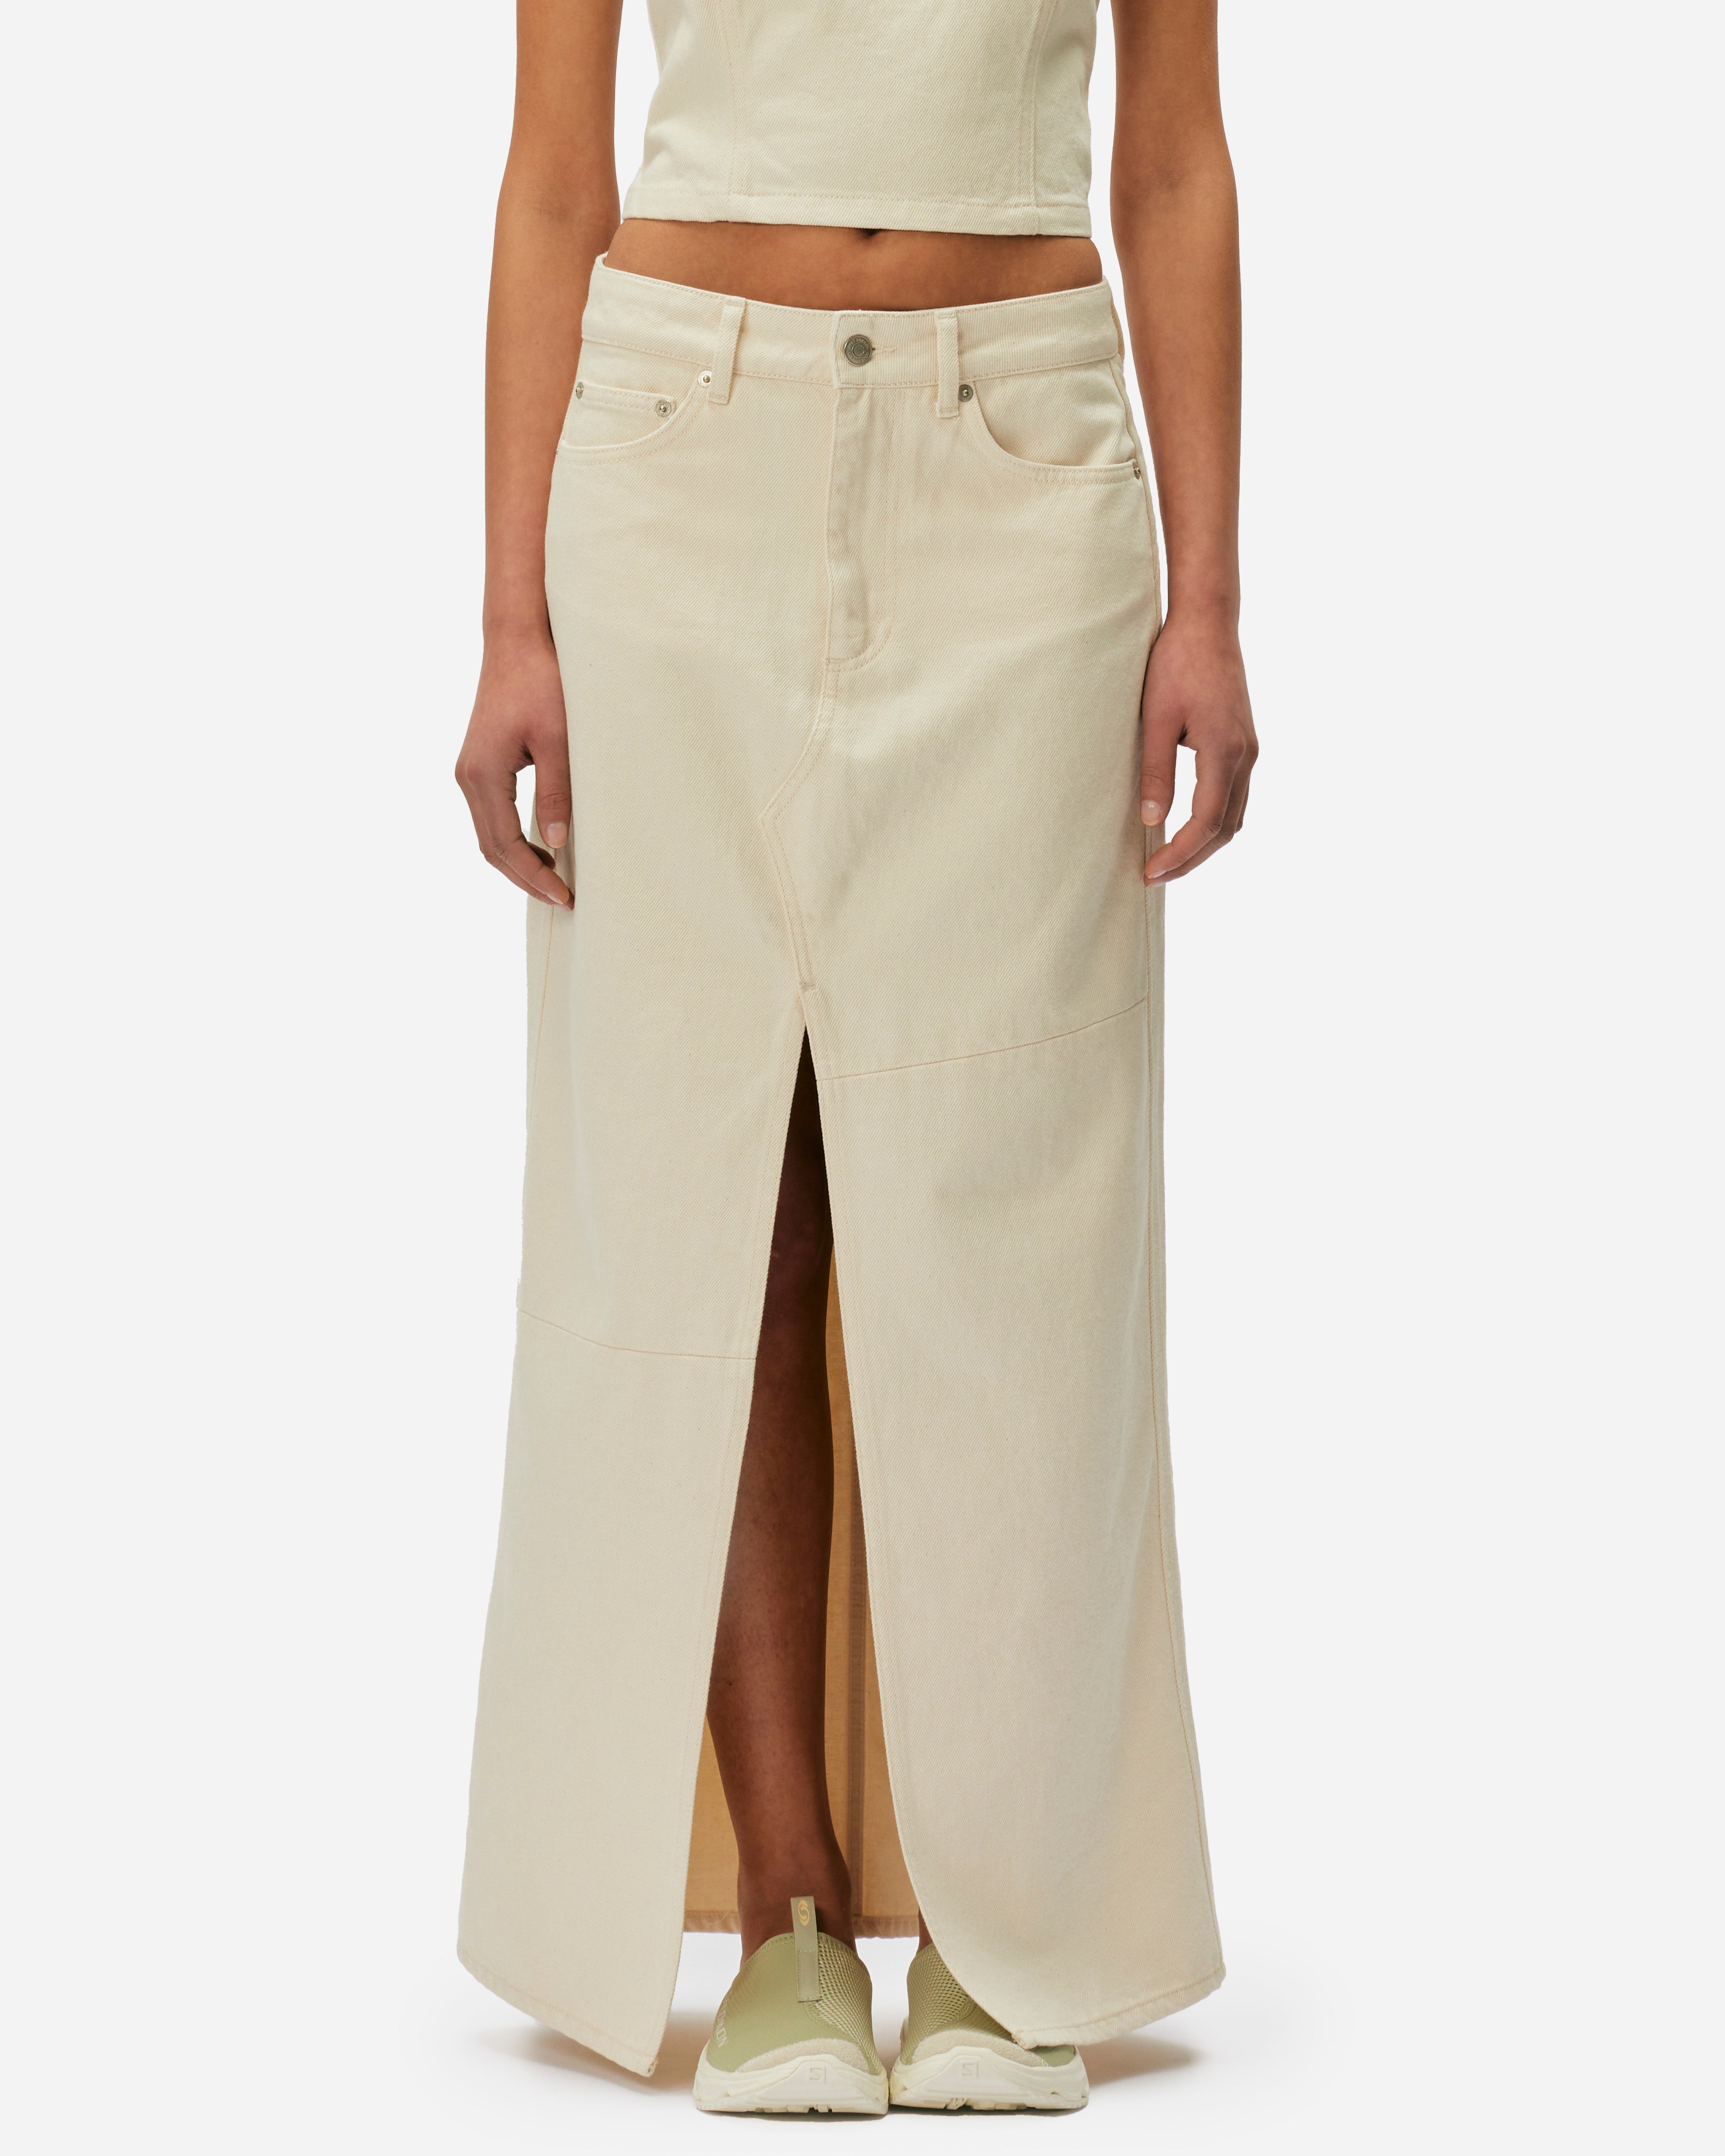 Oval Square Wonder Maxi Skirt Offwhite 20704-1005